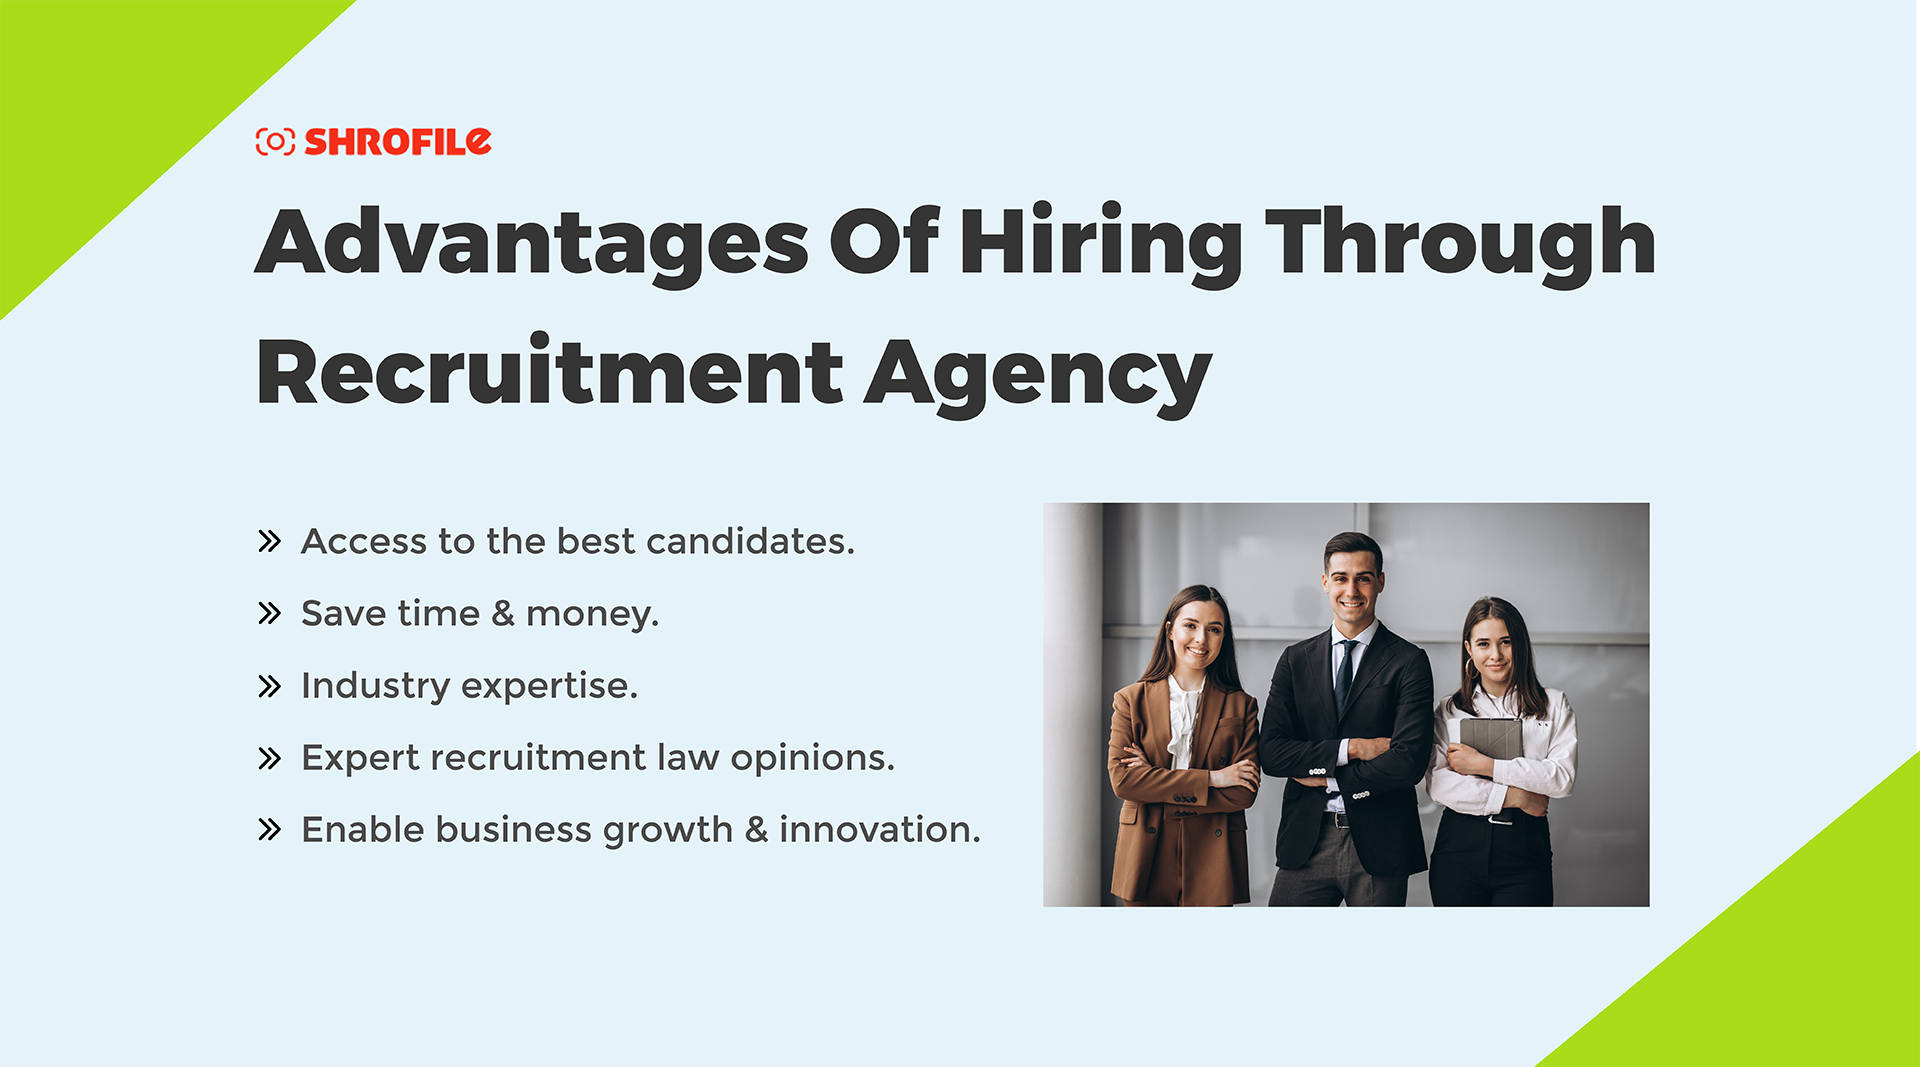 The Benefits of Using a Recruitment Agency